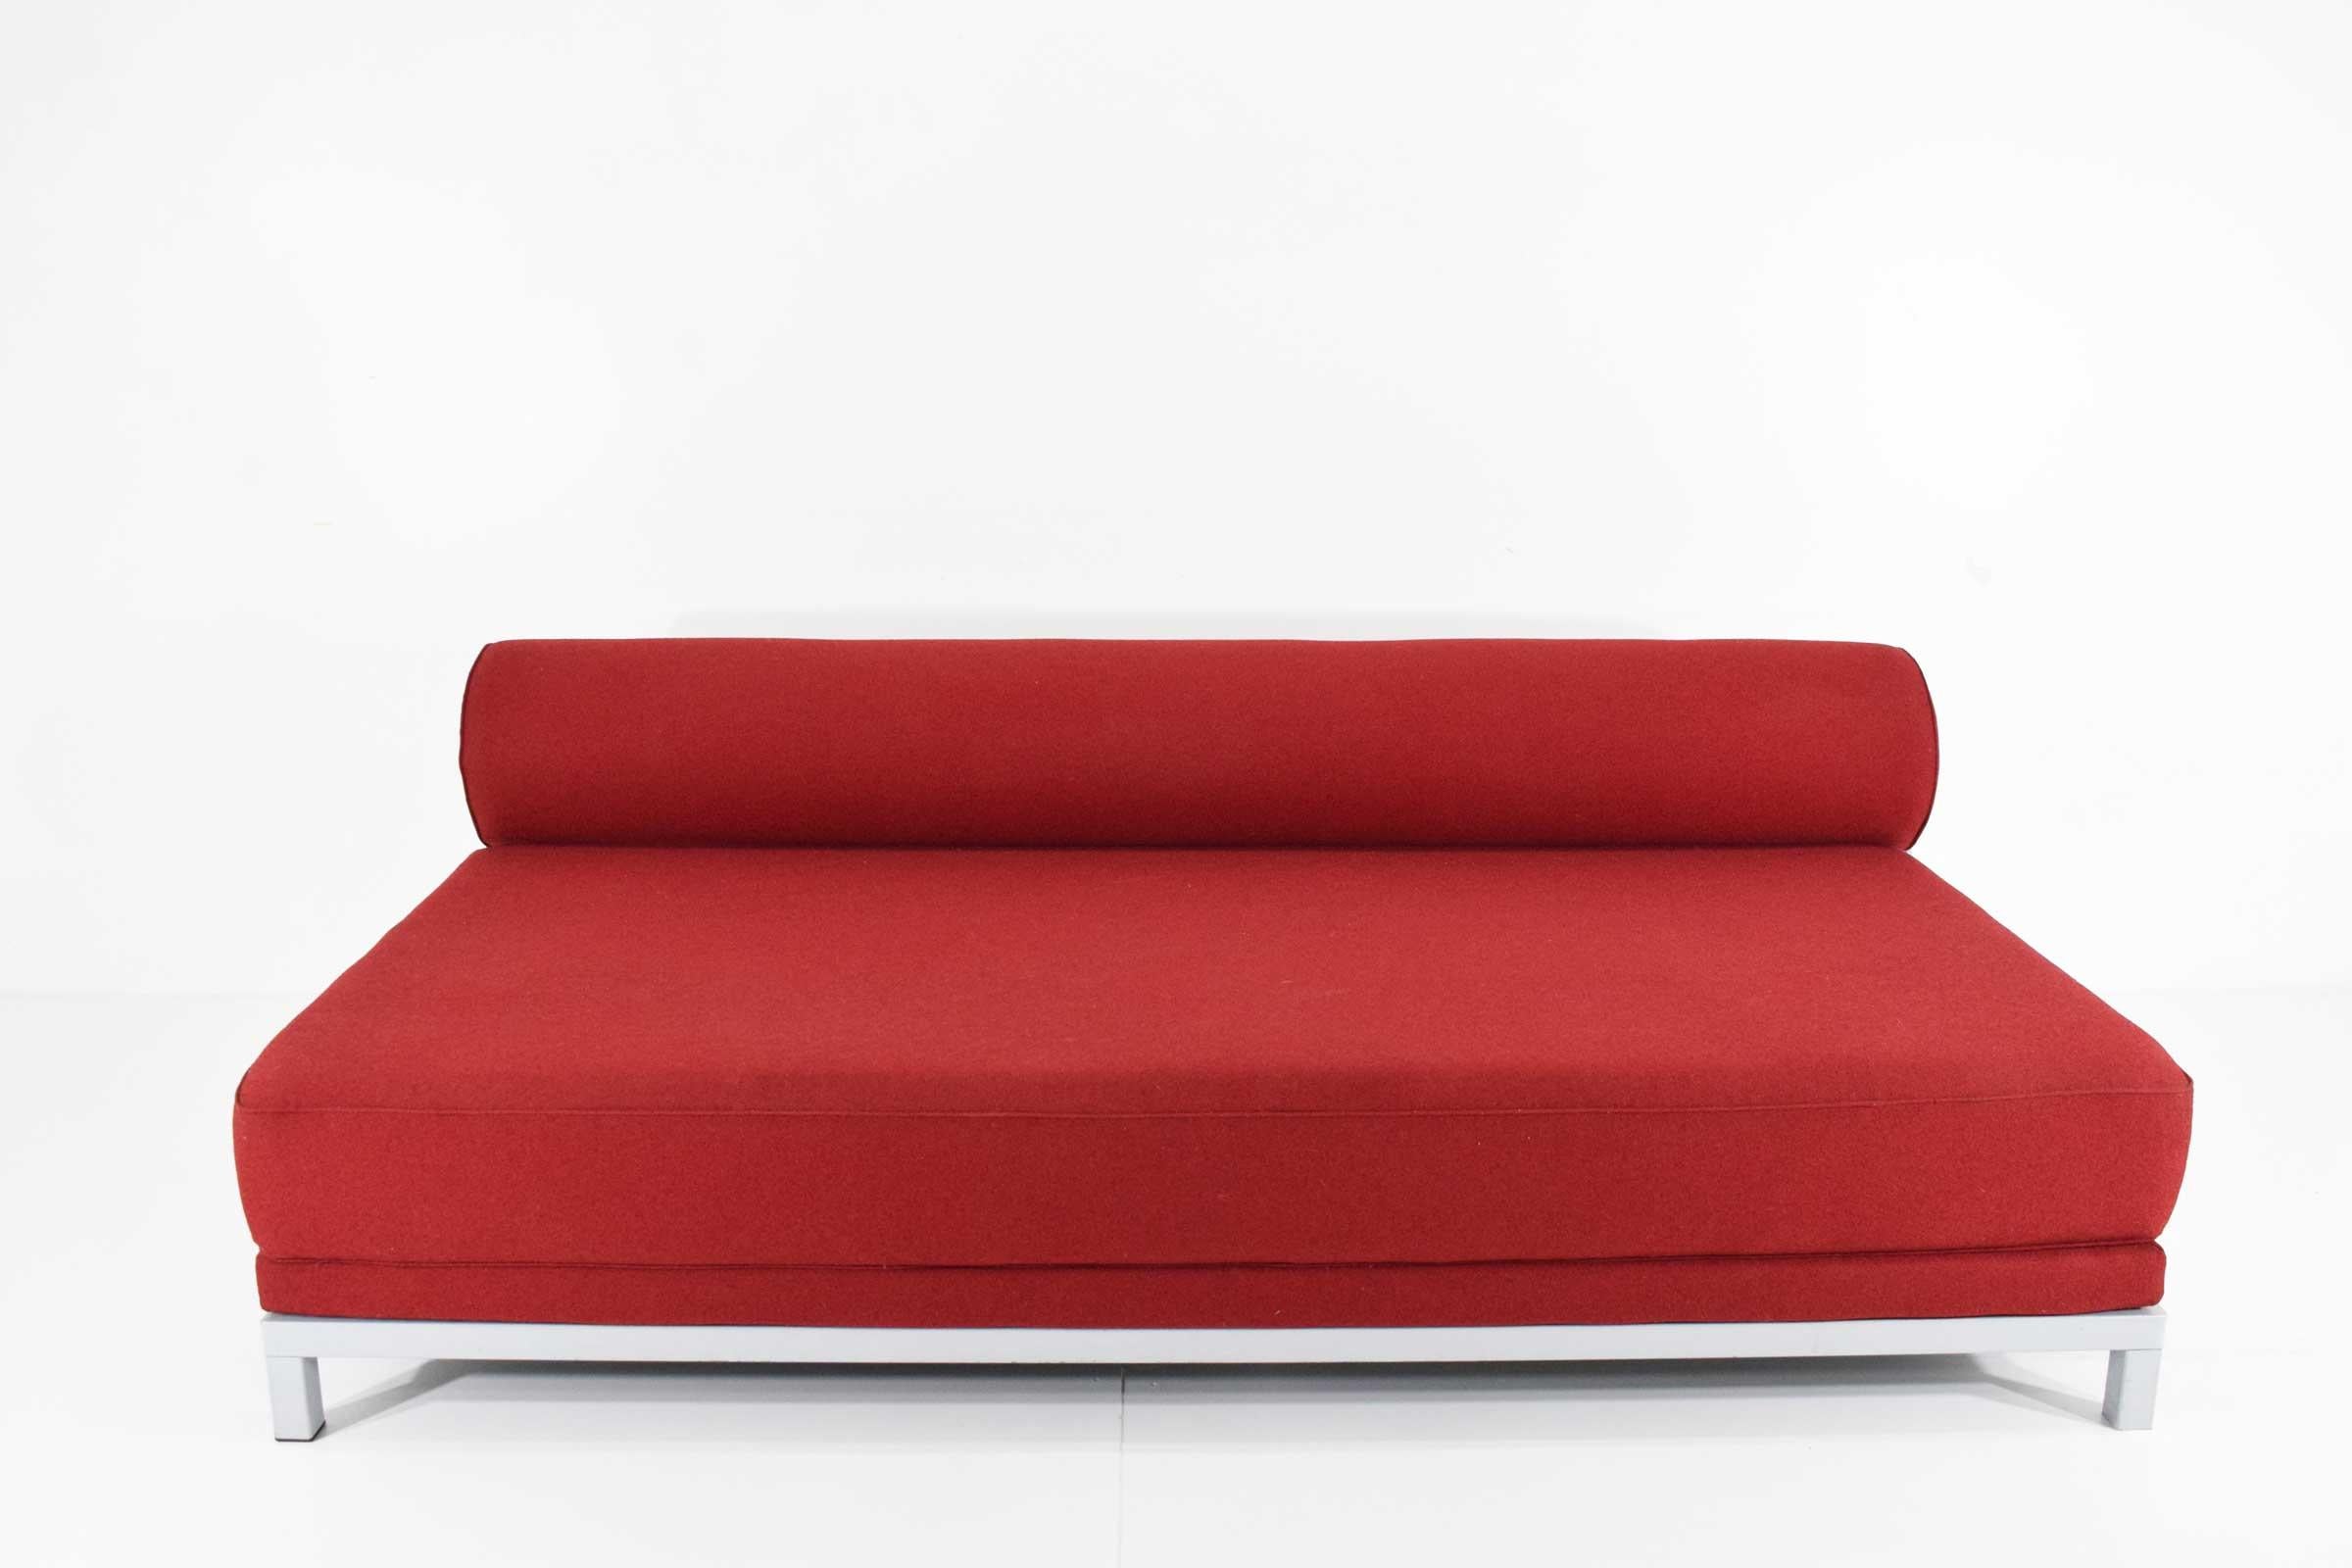 North American Fleming Busk for Softline Twilight Sleeper Sofa in Red